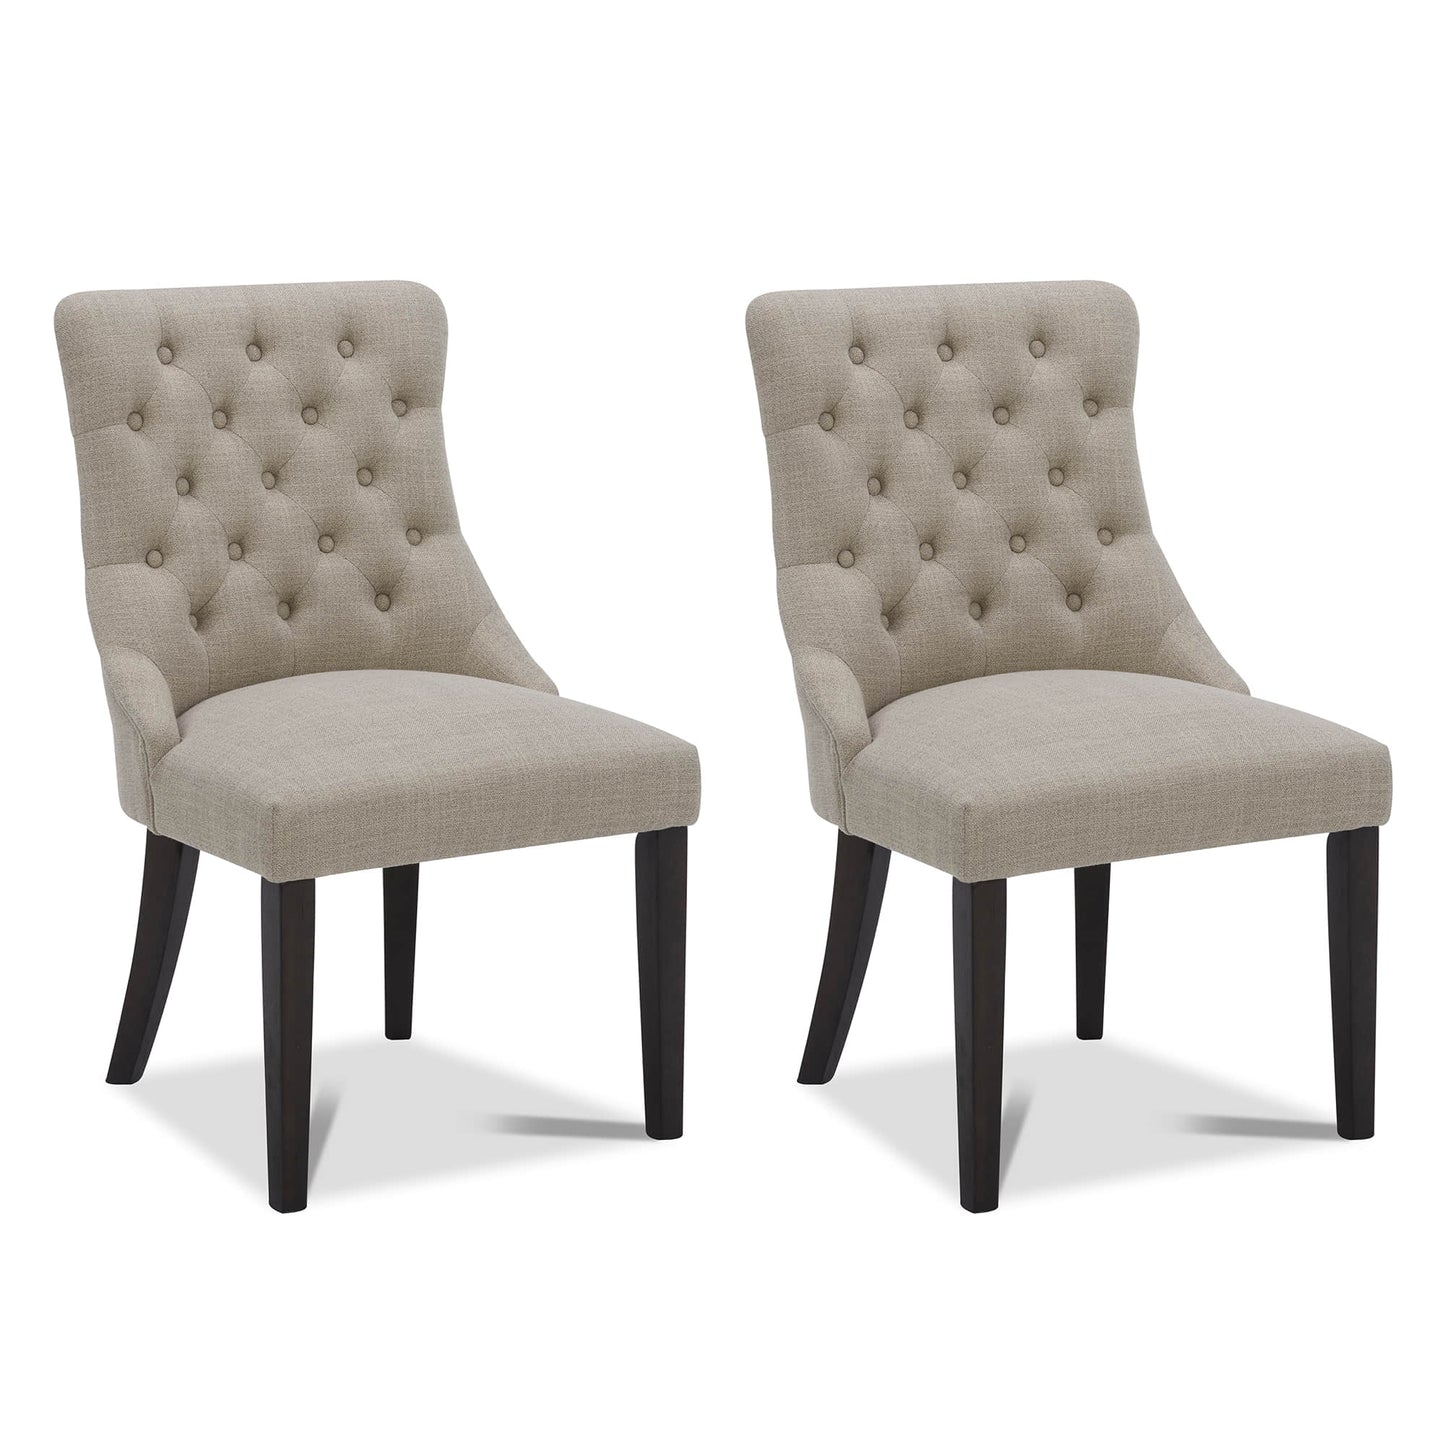 CHITA LIVING-Morgan Prime Tufted Dining Chair (Set of 2)-Dining Chairs-Performance Fabric-Tan-